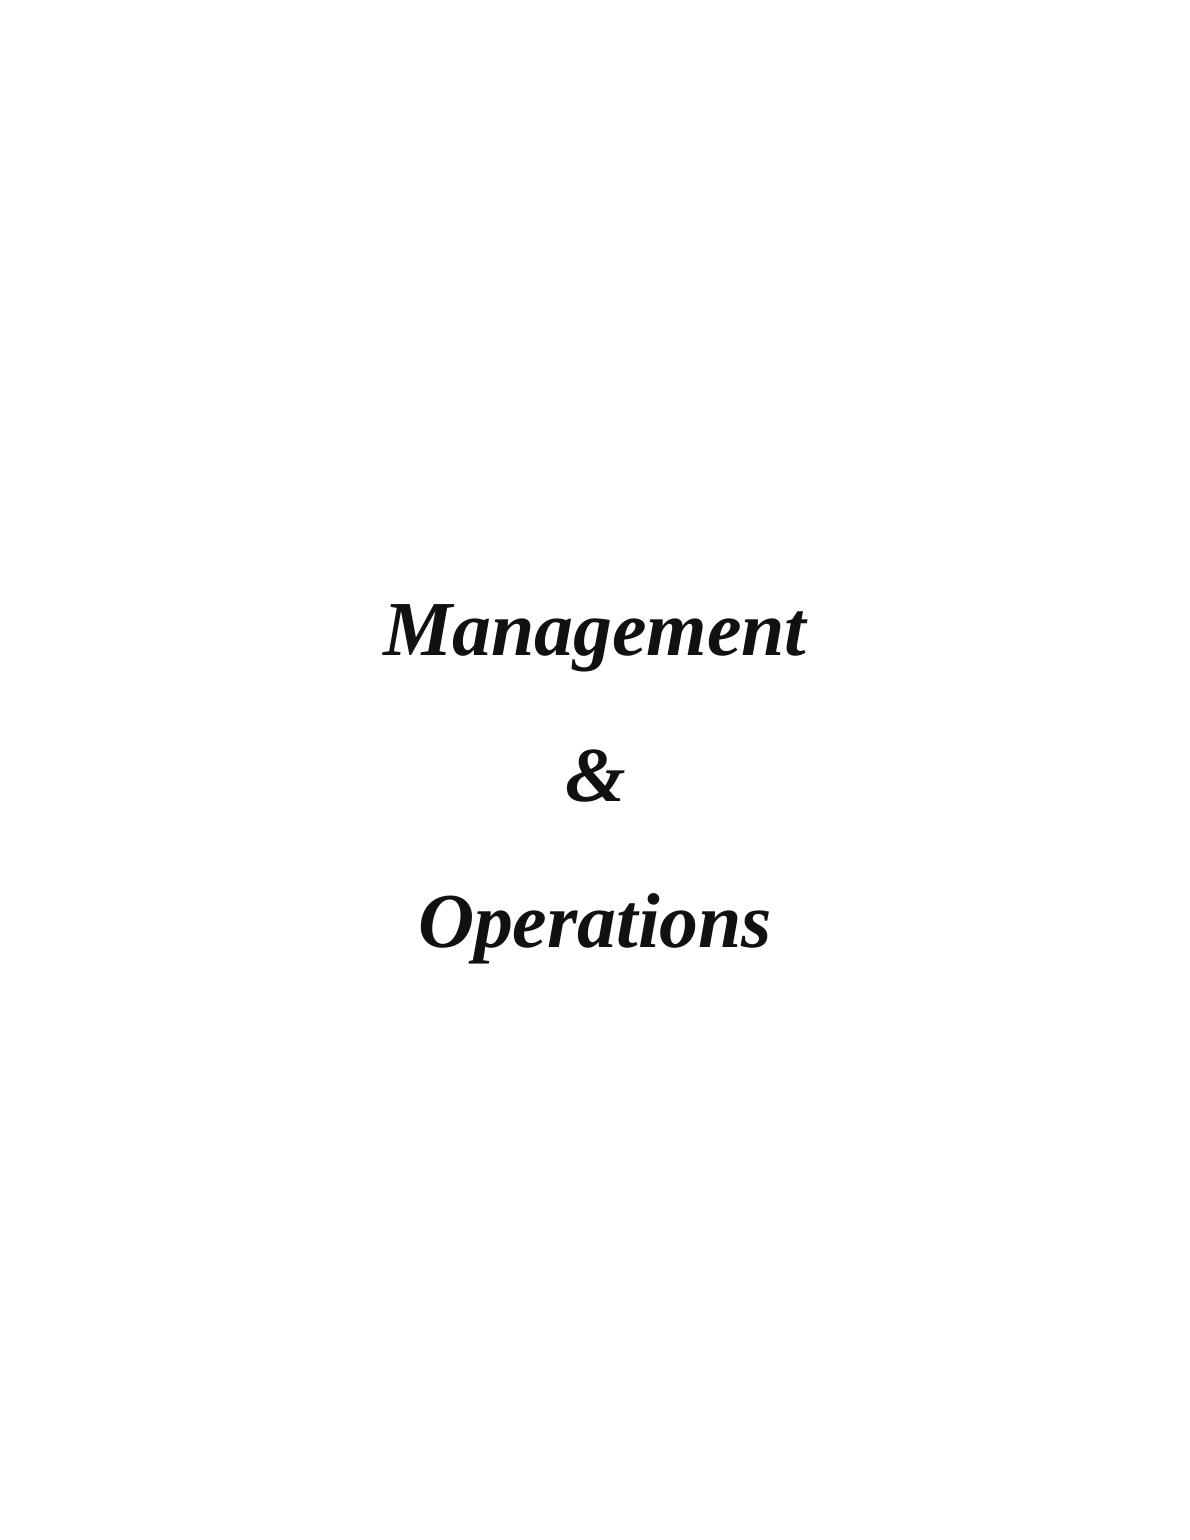 Management & Operations Assignment - Toyota_1